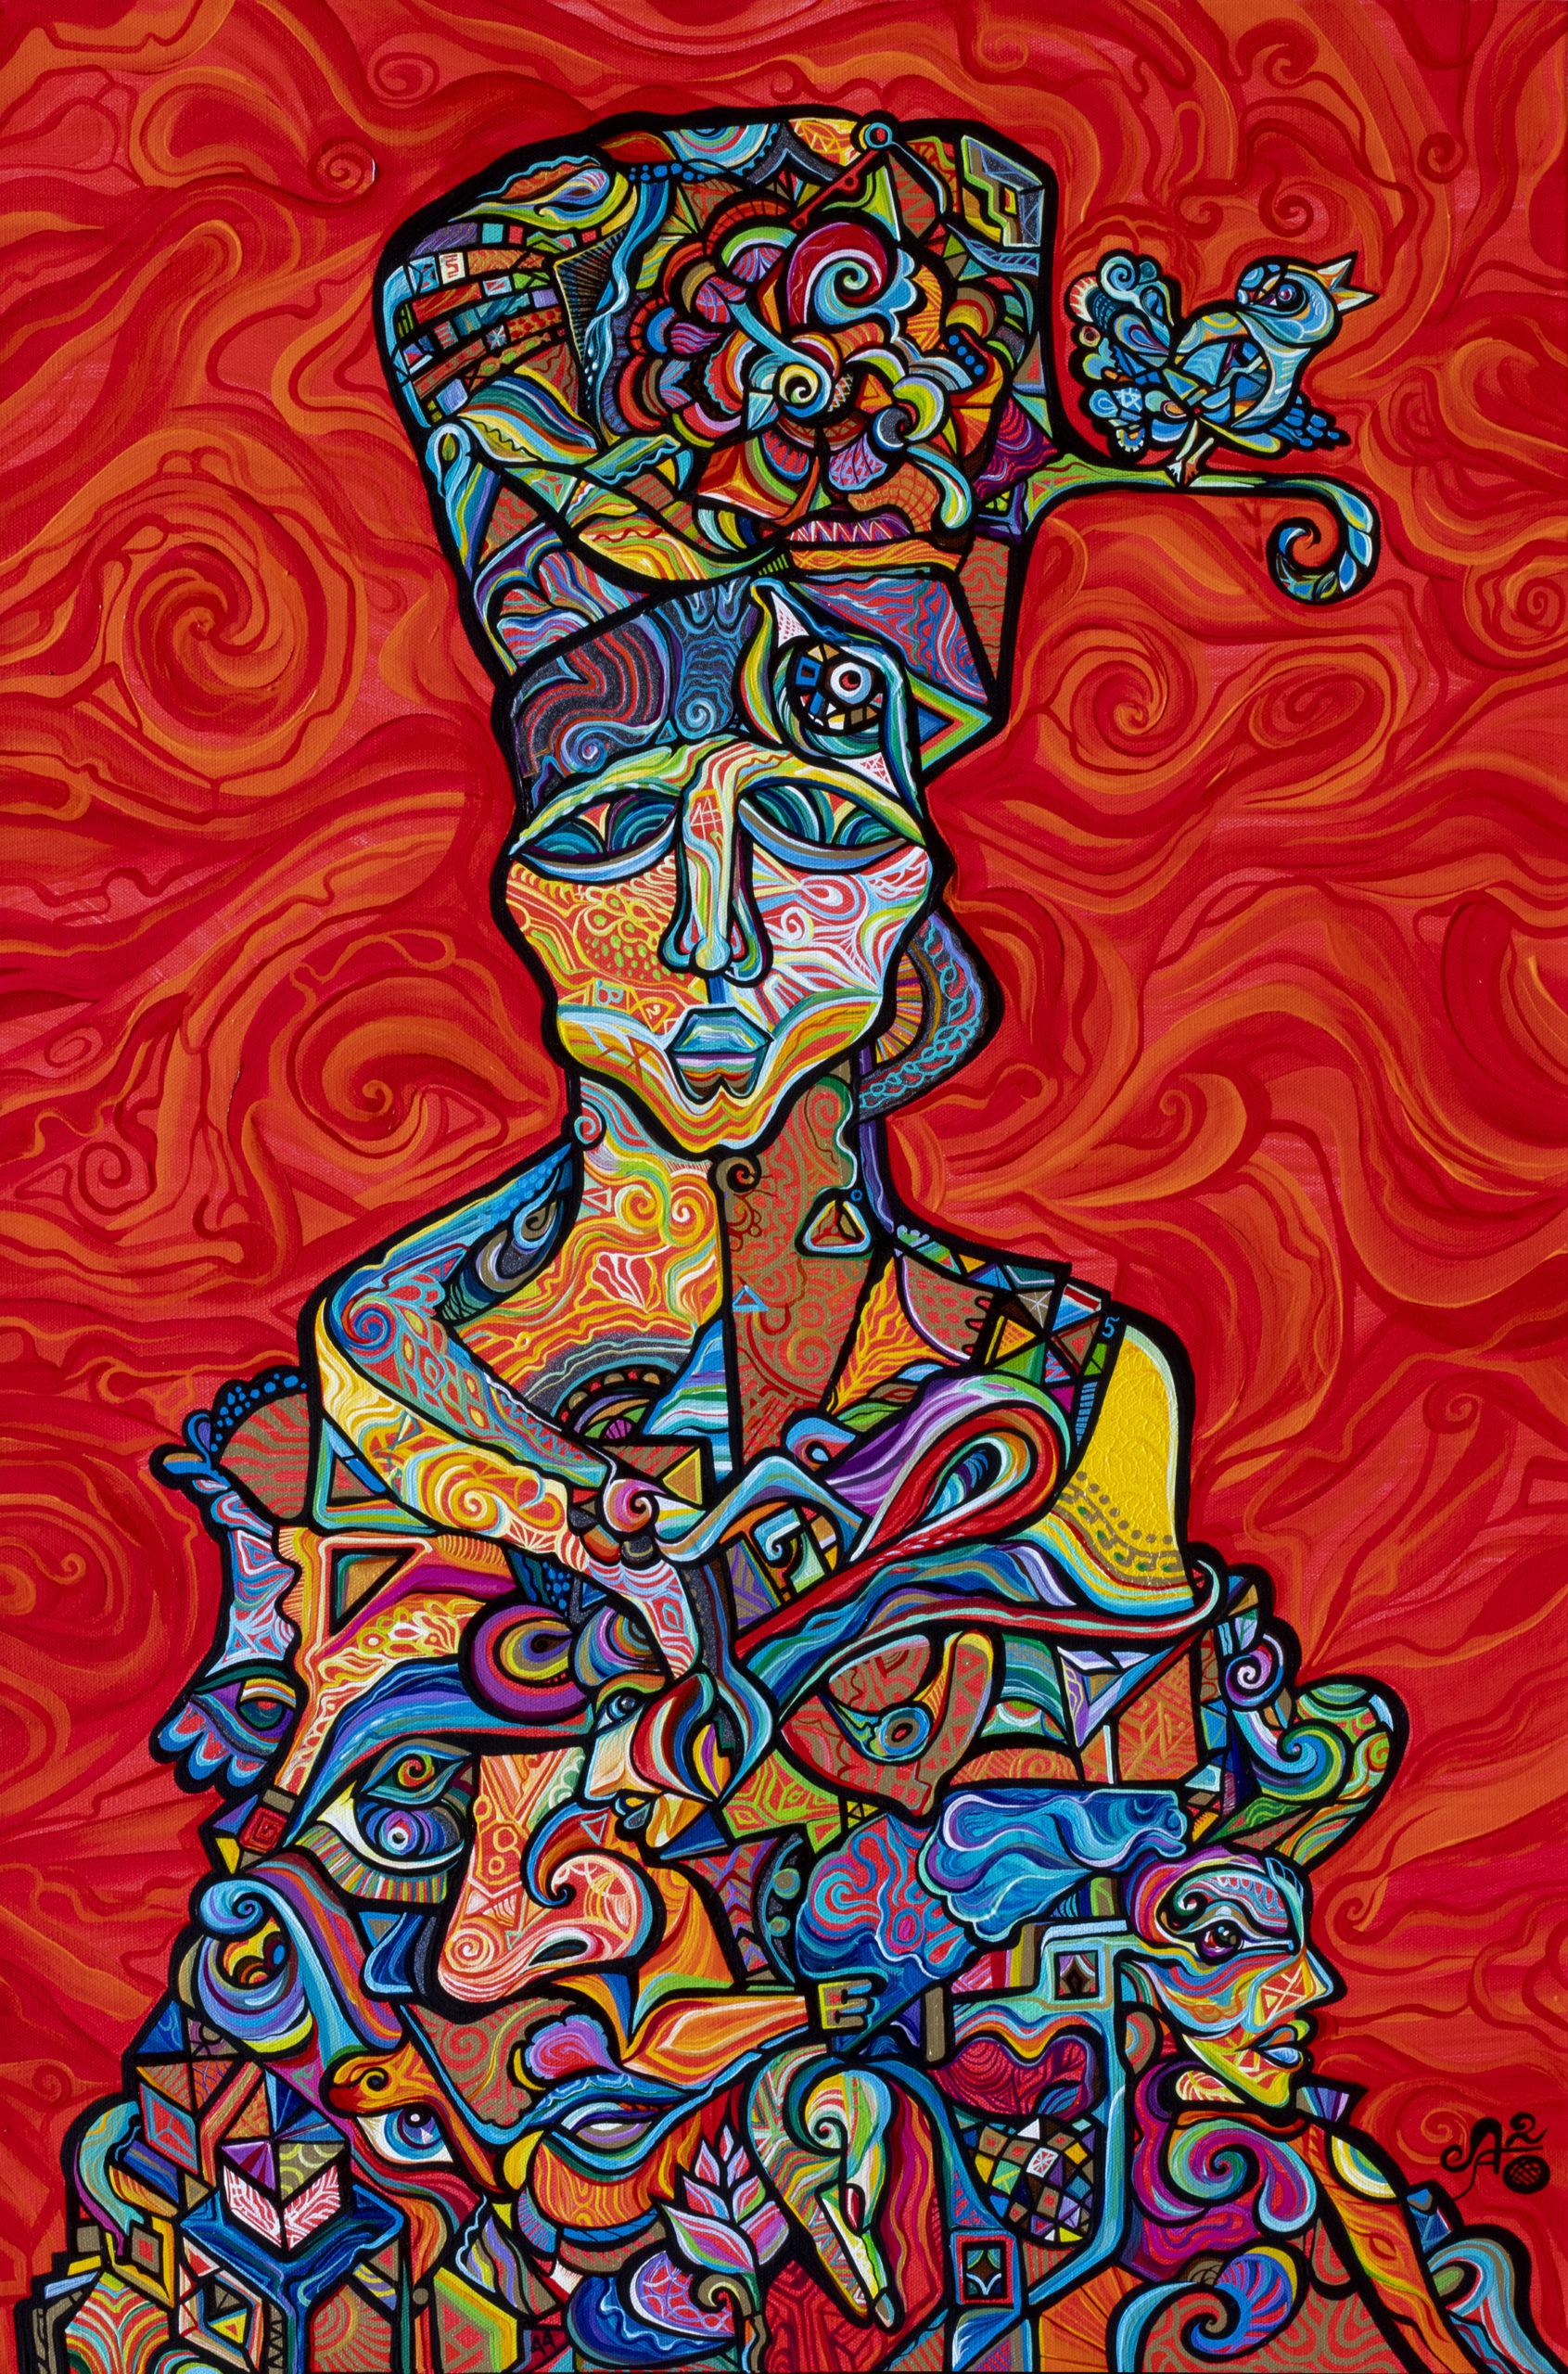 Figurative Biomorphic Cubist Painting Titled, "Stepmother Nature"